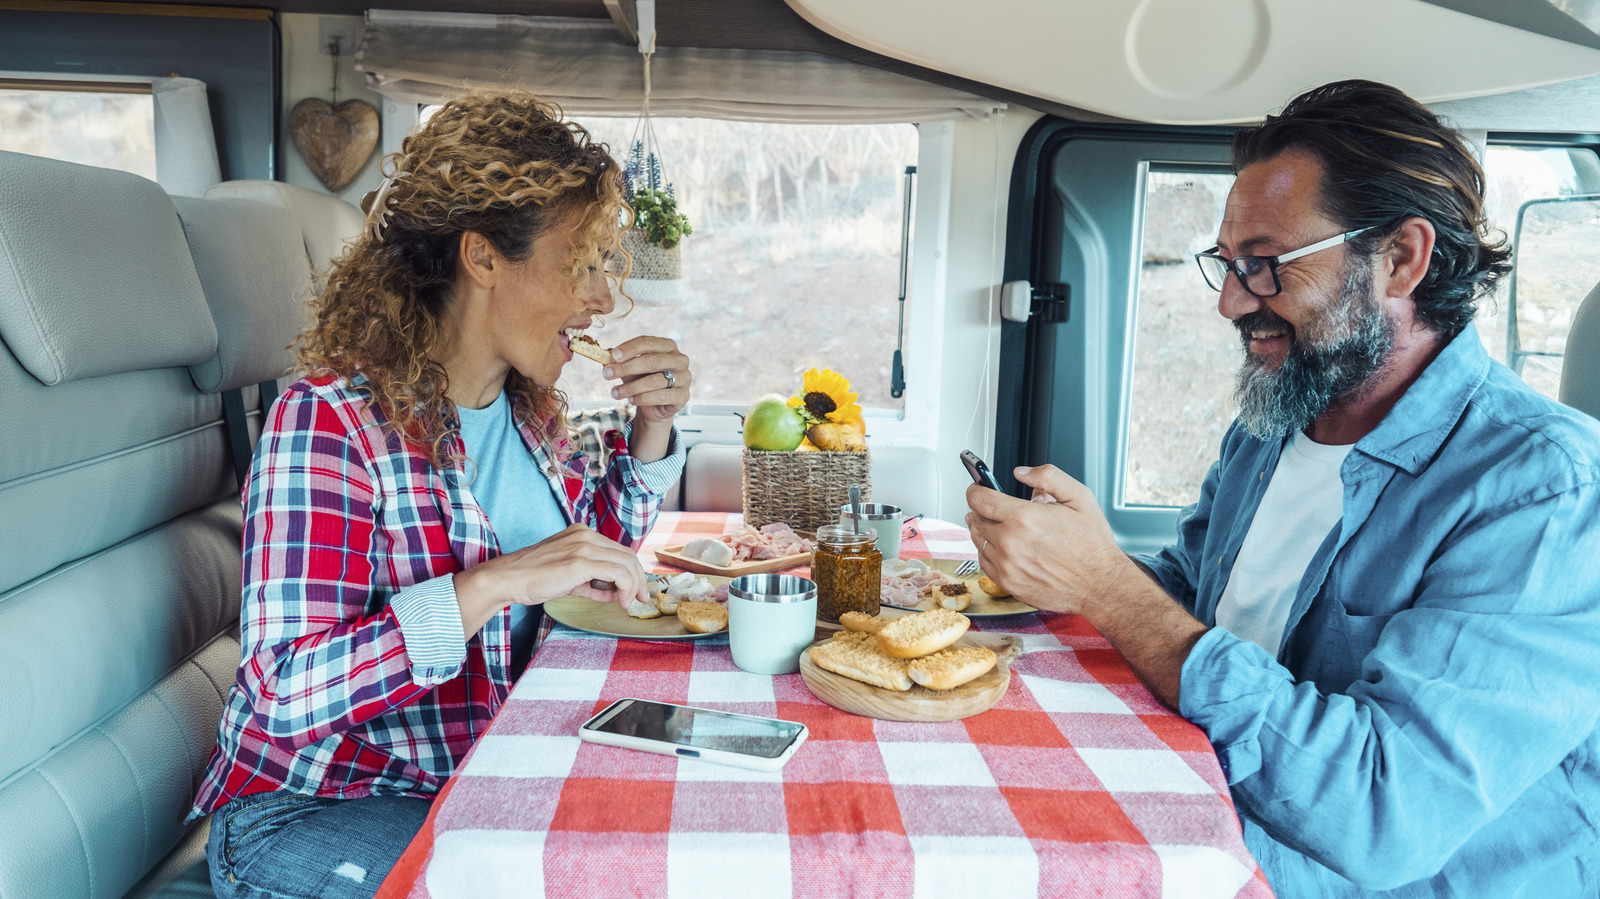 Keep Your RV Refrigerator Organized With These Viral Tips